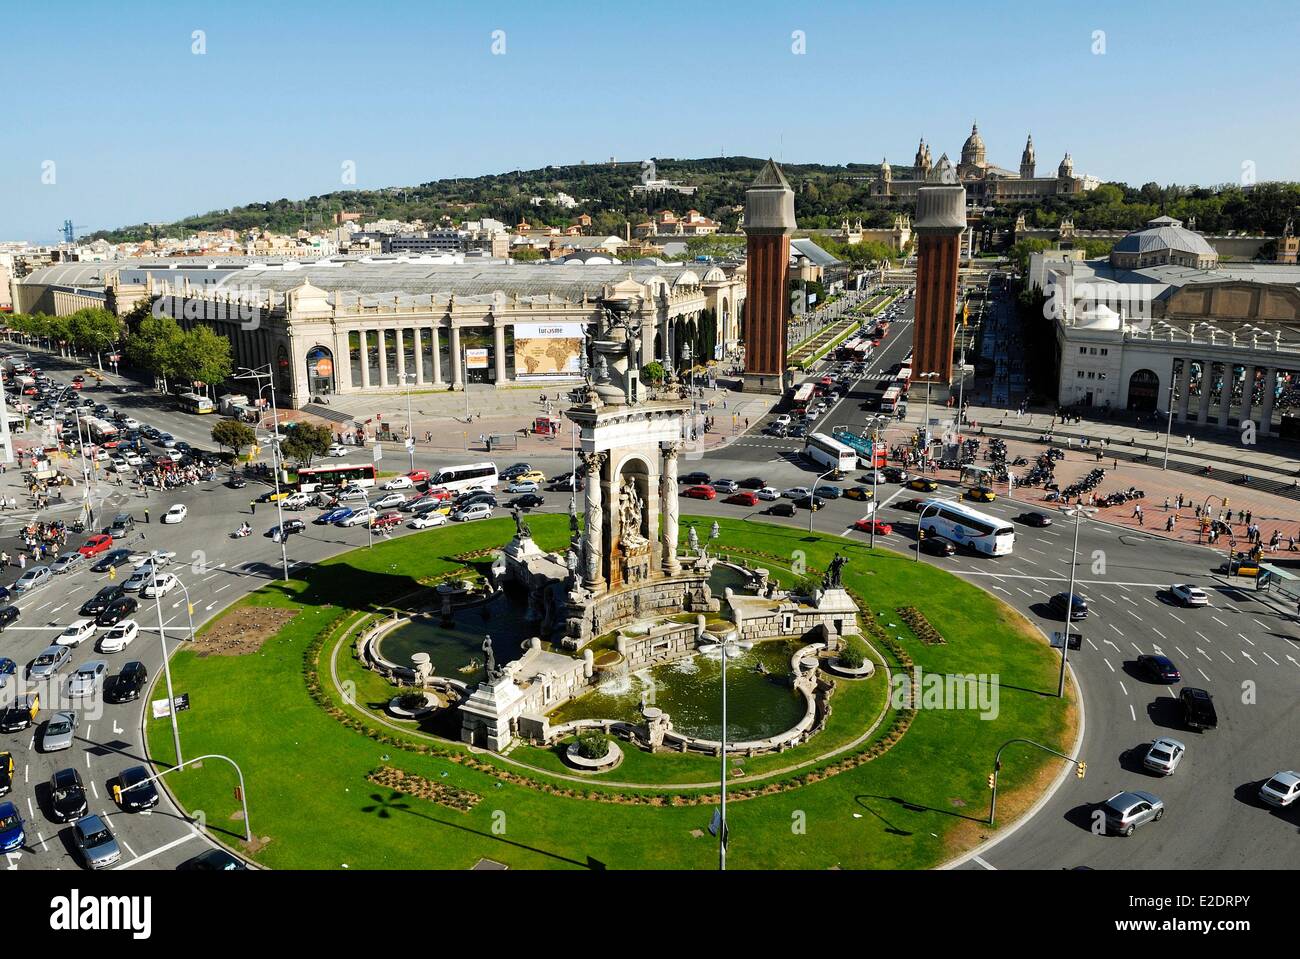 Spain Catalonia Barcelona Montjuic district plaza de Espana and the monumental fountain designed in 1929 by th architect Josep Stock Photo